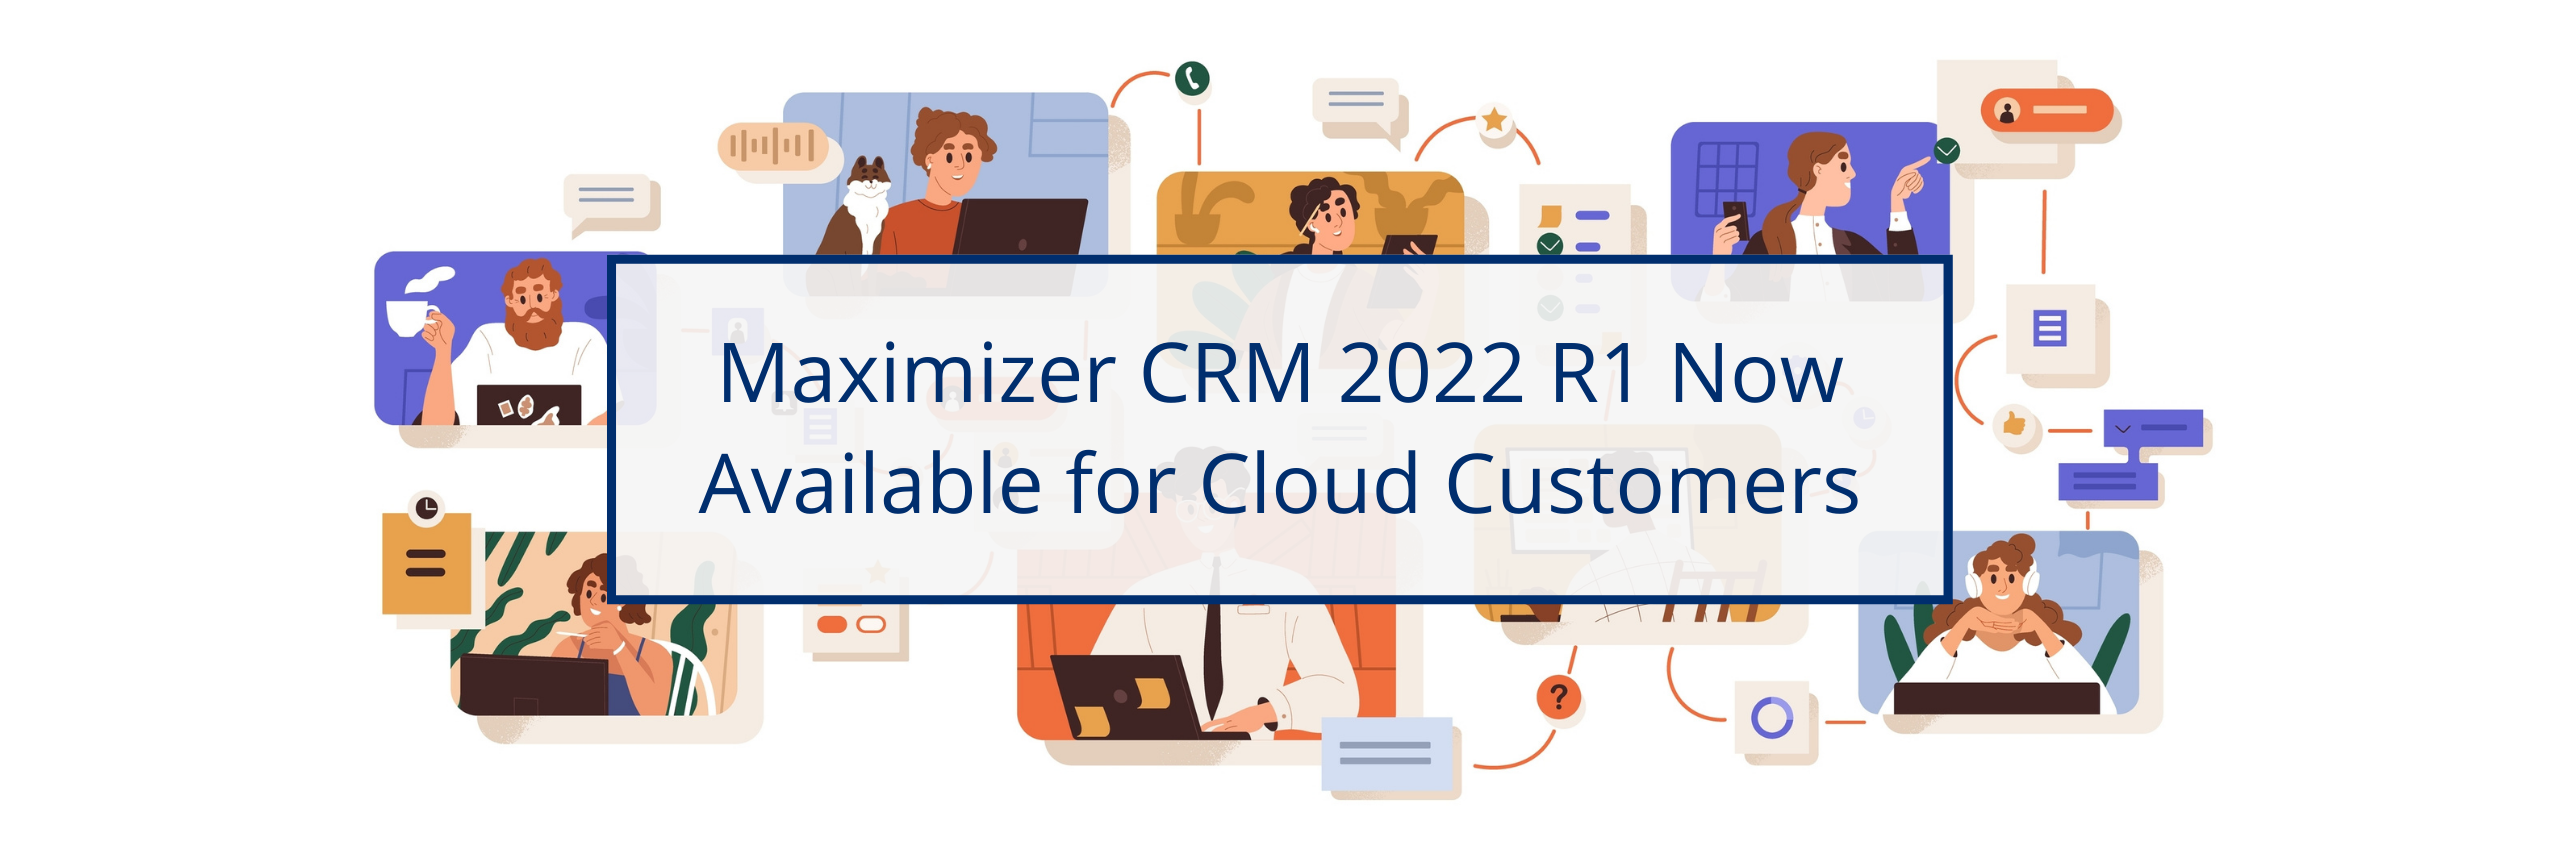 Maximizer CRM 2022 R1 Now Available for Cloud Customers